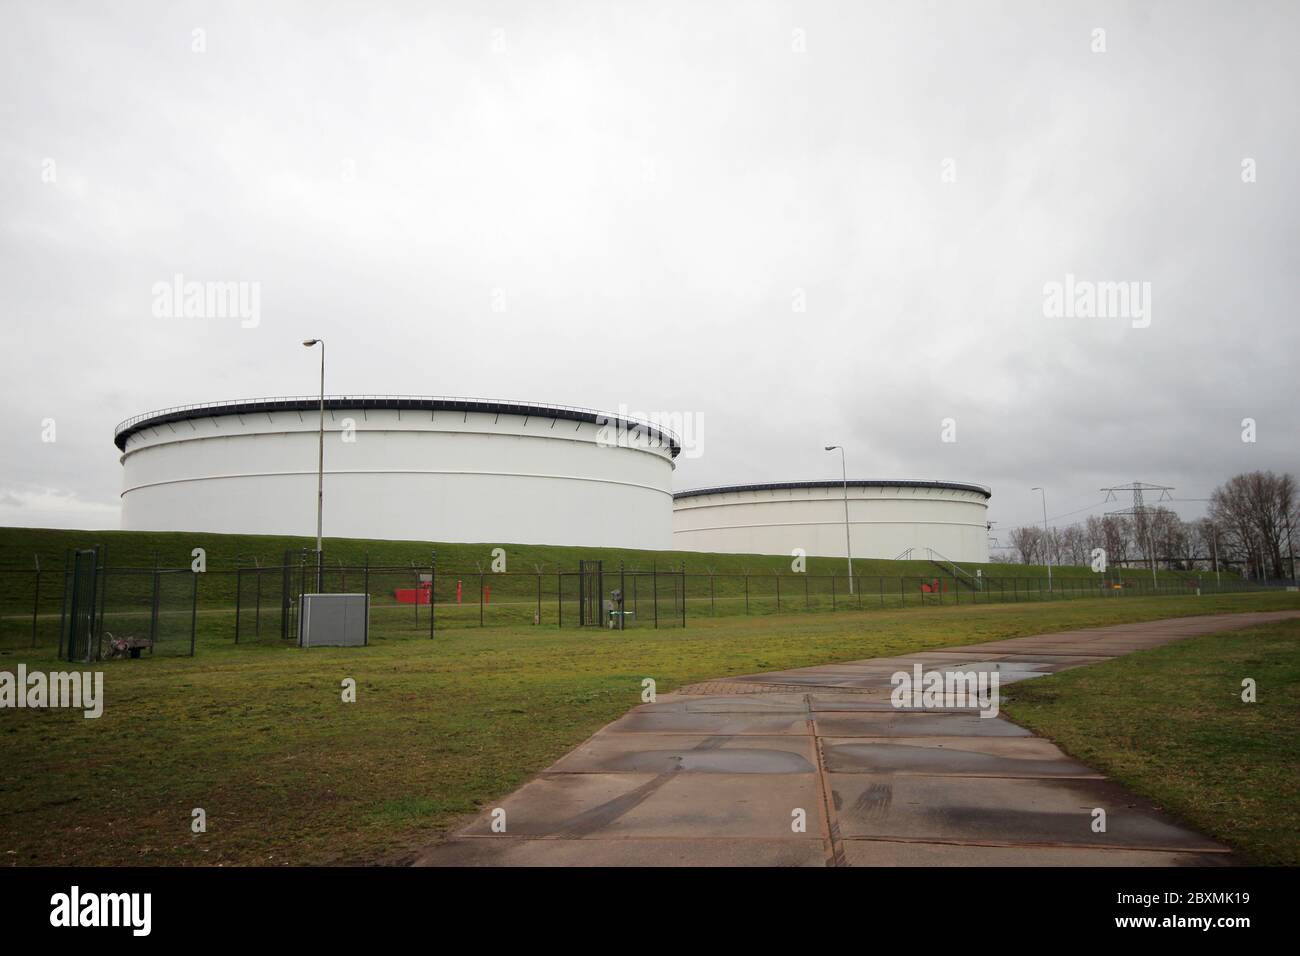 Big storage tanks for crude oil or petrol at terminal in de botlek harbor of the Port of Rotterdam Stock Photo